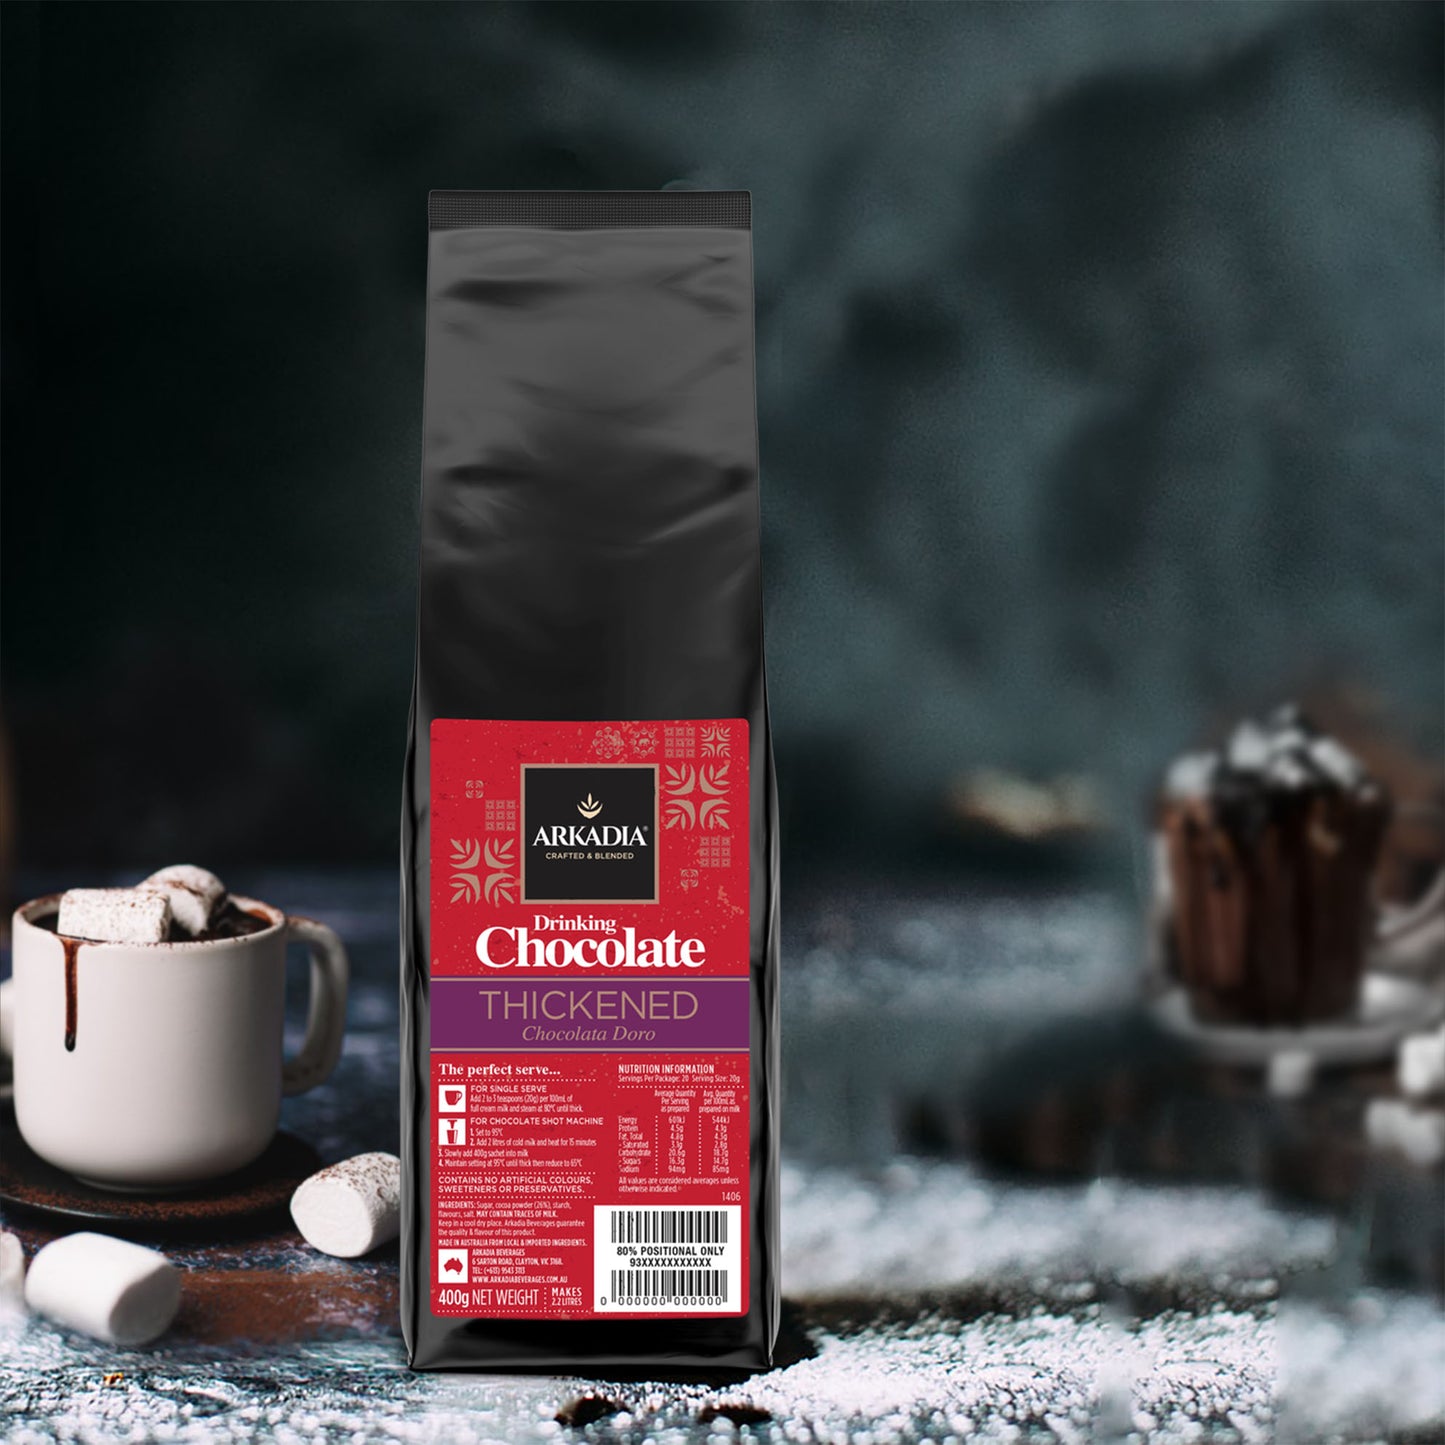 One black pack of chocolate, with a red label next to a thick got chocolate cup, filled with marshmallow, on the background premium best coffee beans and di lorenzo red coffee bag 